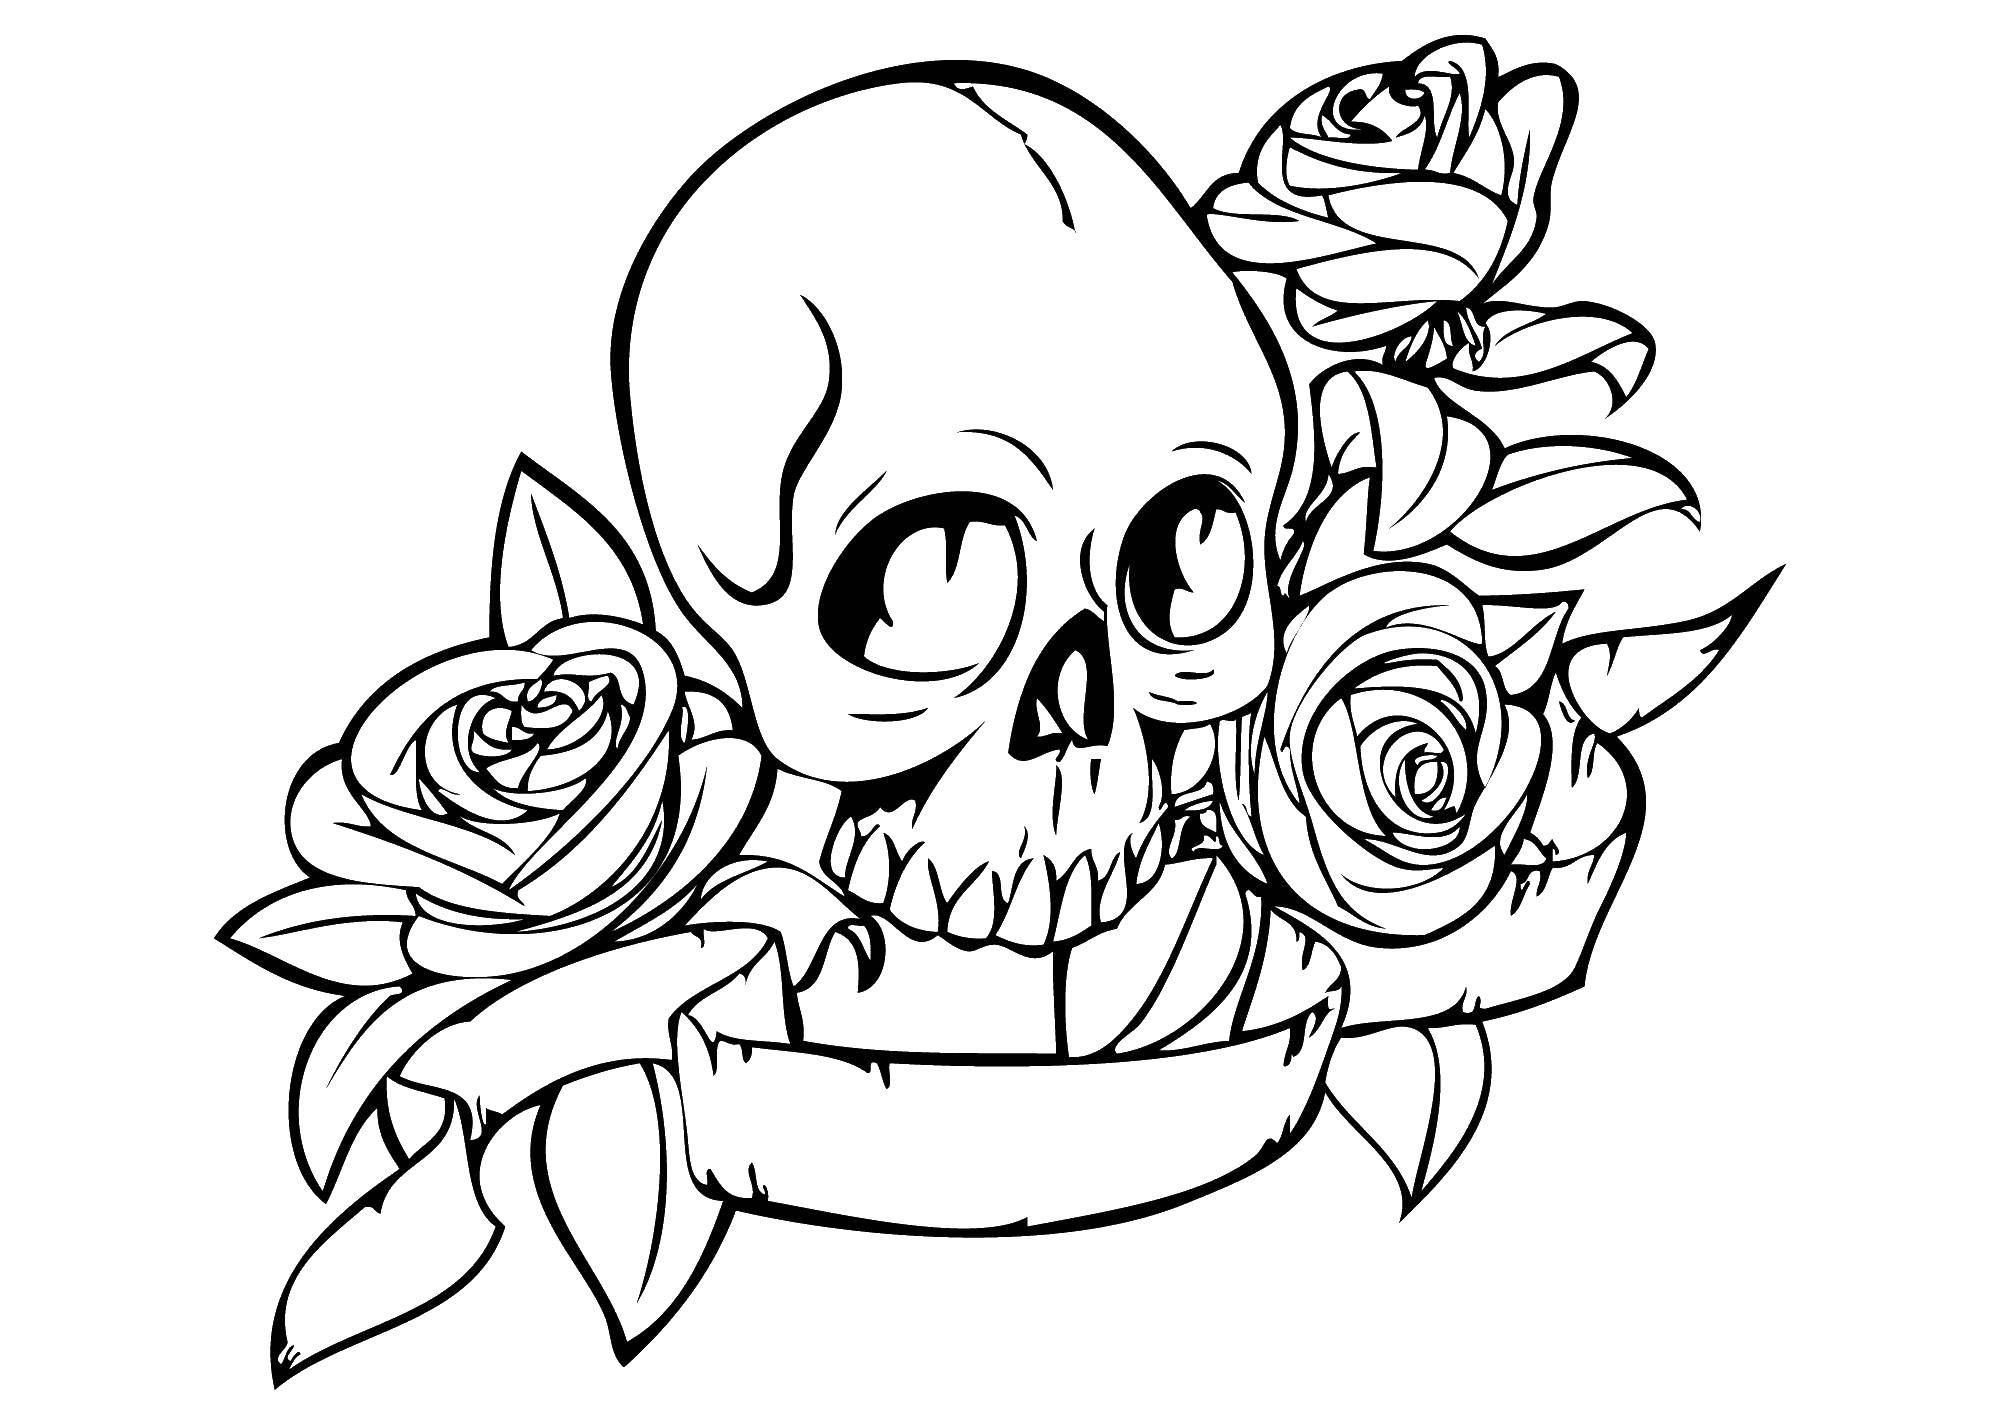 Coloring A skull with three roses. Category Skull. Tags:  skull, roses.